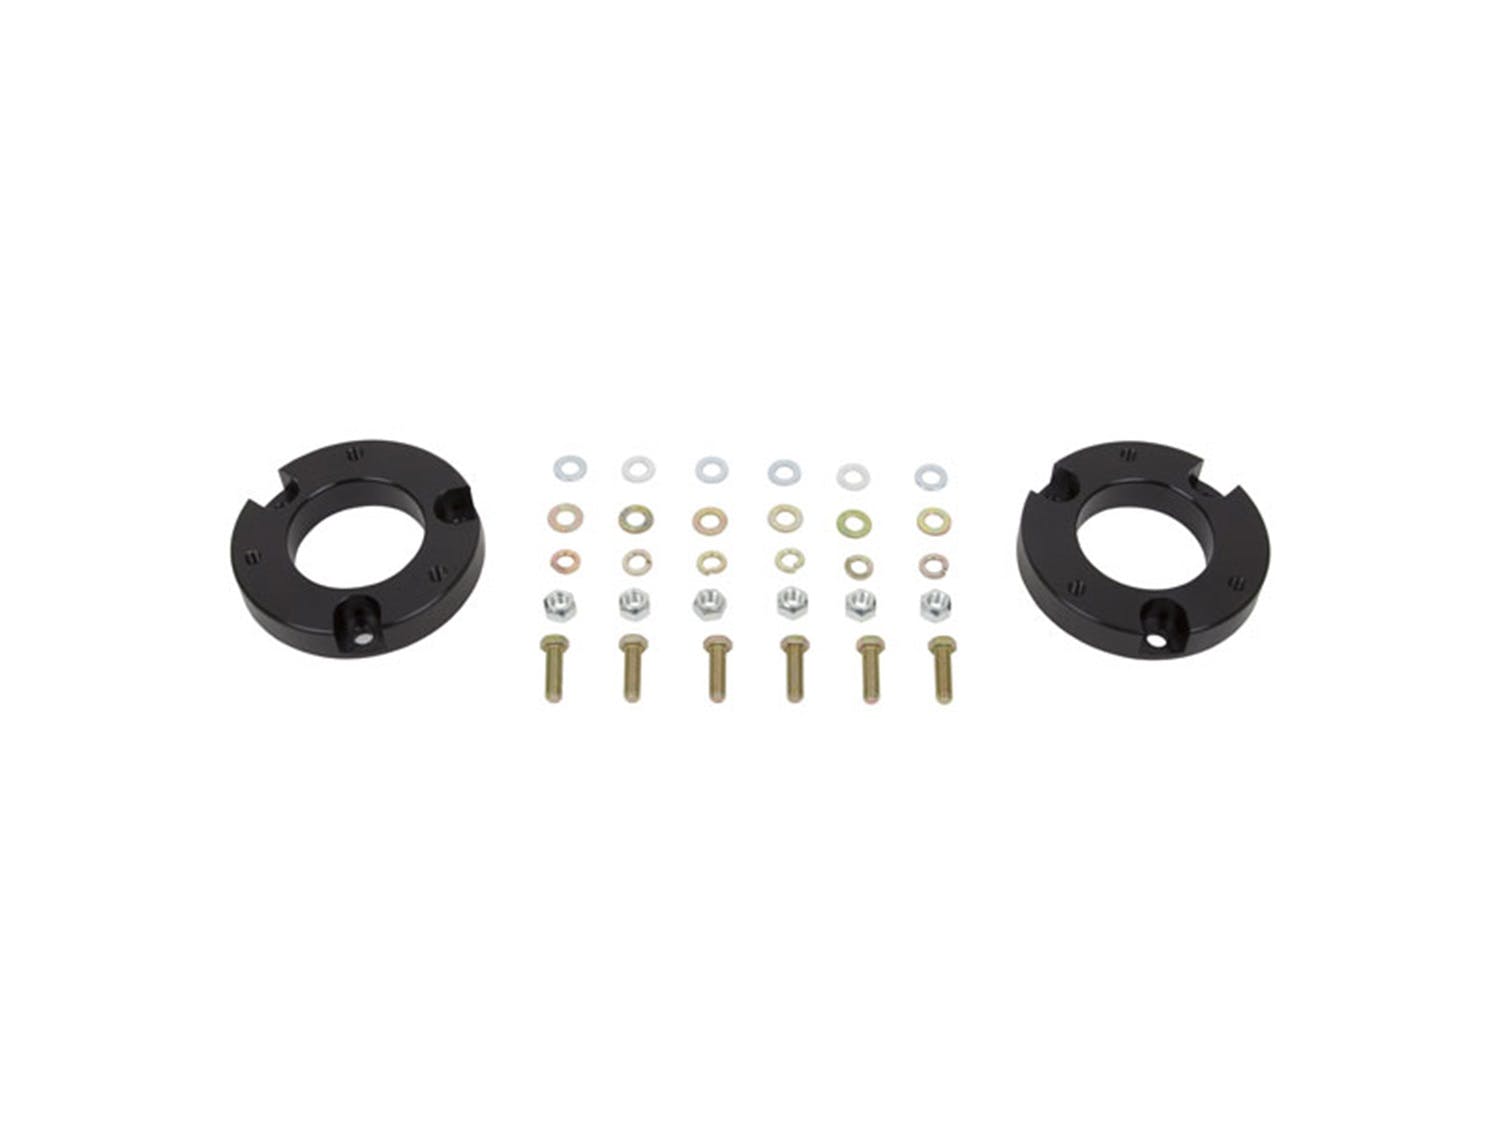 Fabtech FTS22132 2in. F150 SHOCK SPACER KIT